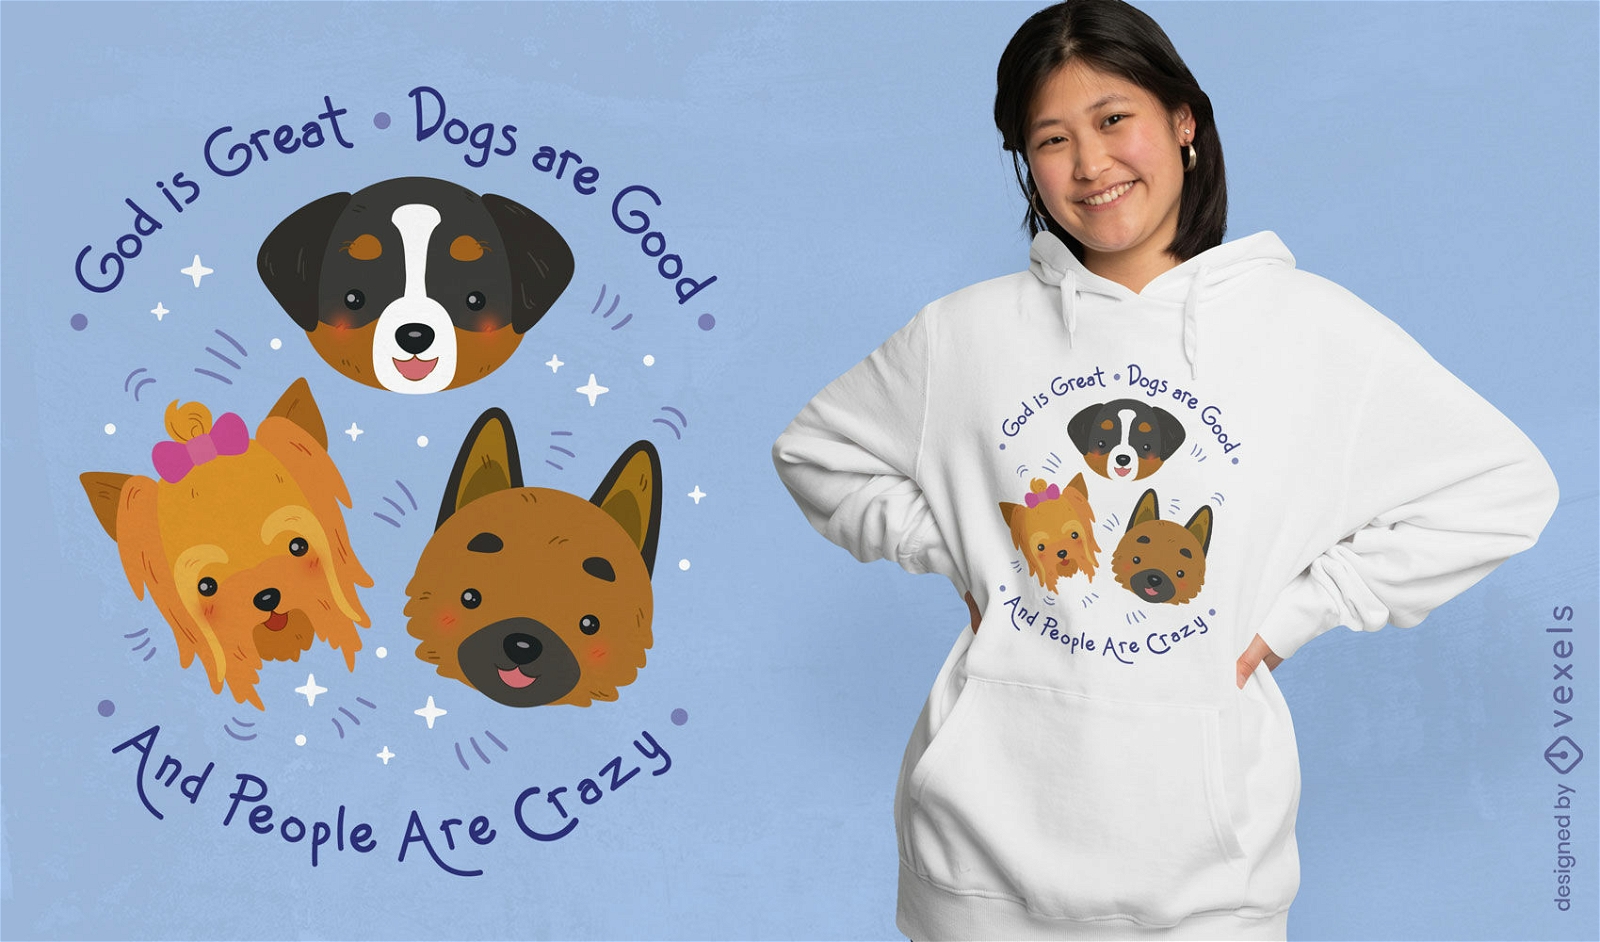 Cra-Z Dogs and More Dogs